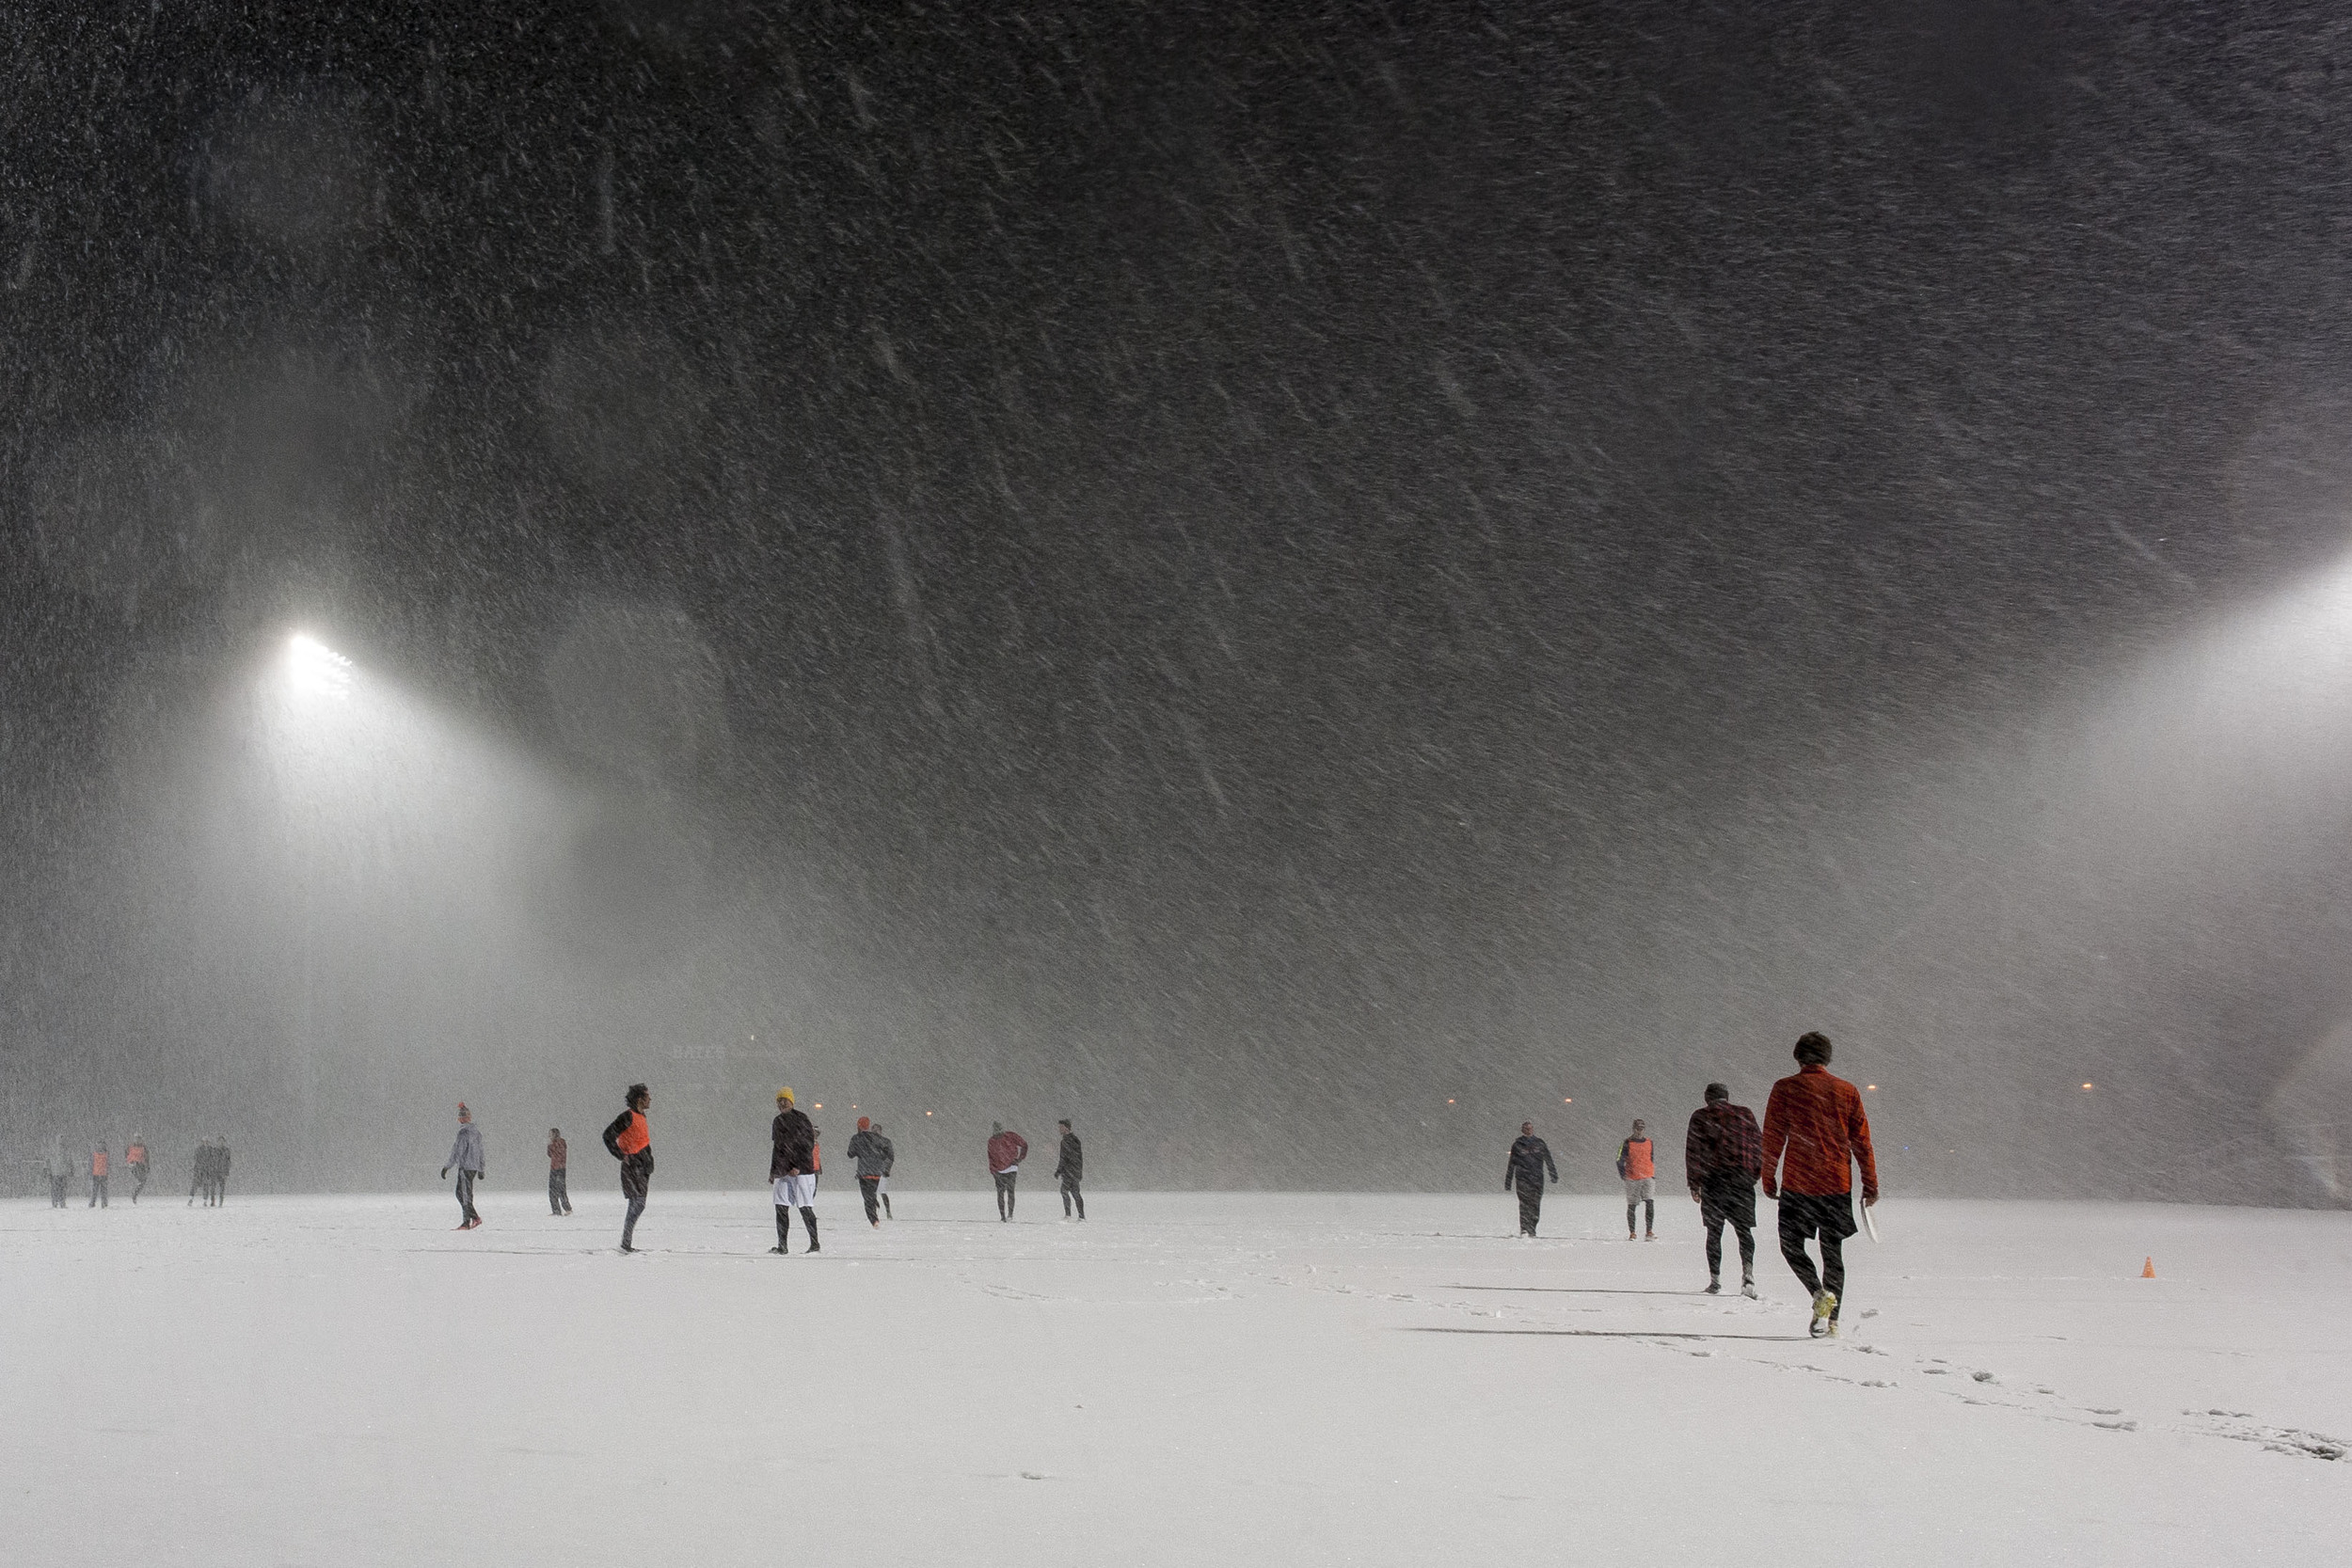  Bates Ultimate Frisbee practice is blanketed by an early spring snowstorm. 